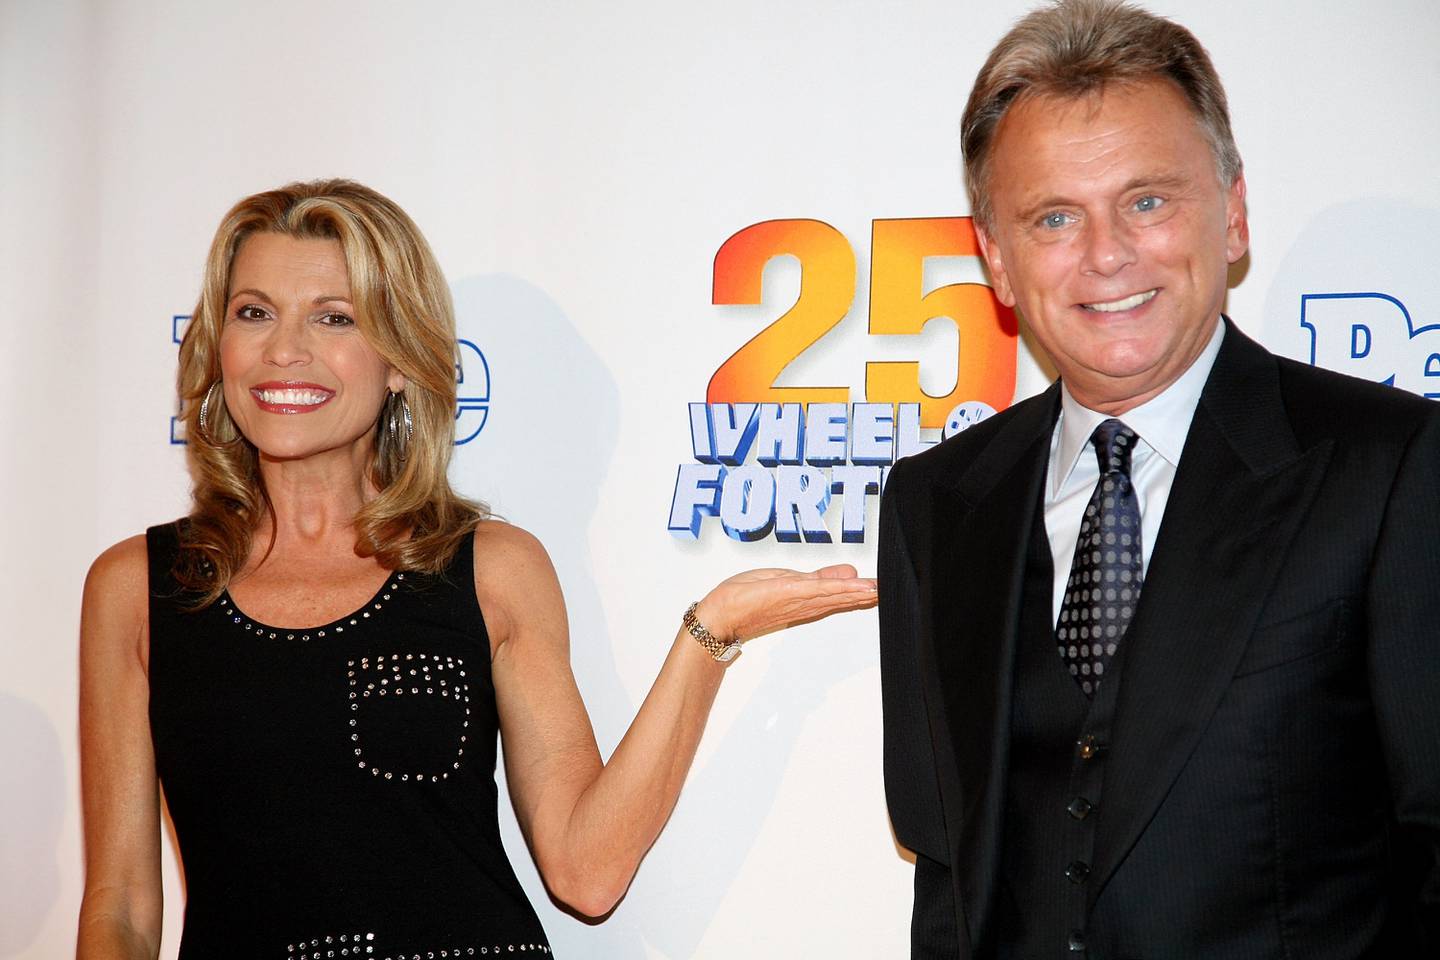 NEW YORK - SEPTEMBER 27:  (R) Host of the TV game show "Wheel Of Fortune" Pat Sajak and model Vanna White attend the 25th anniversary celebration of the television game show "Wheel Of Fortune" at Radio City Music Hall September 27, 2007 in New York City.